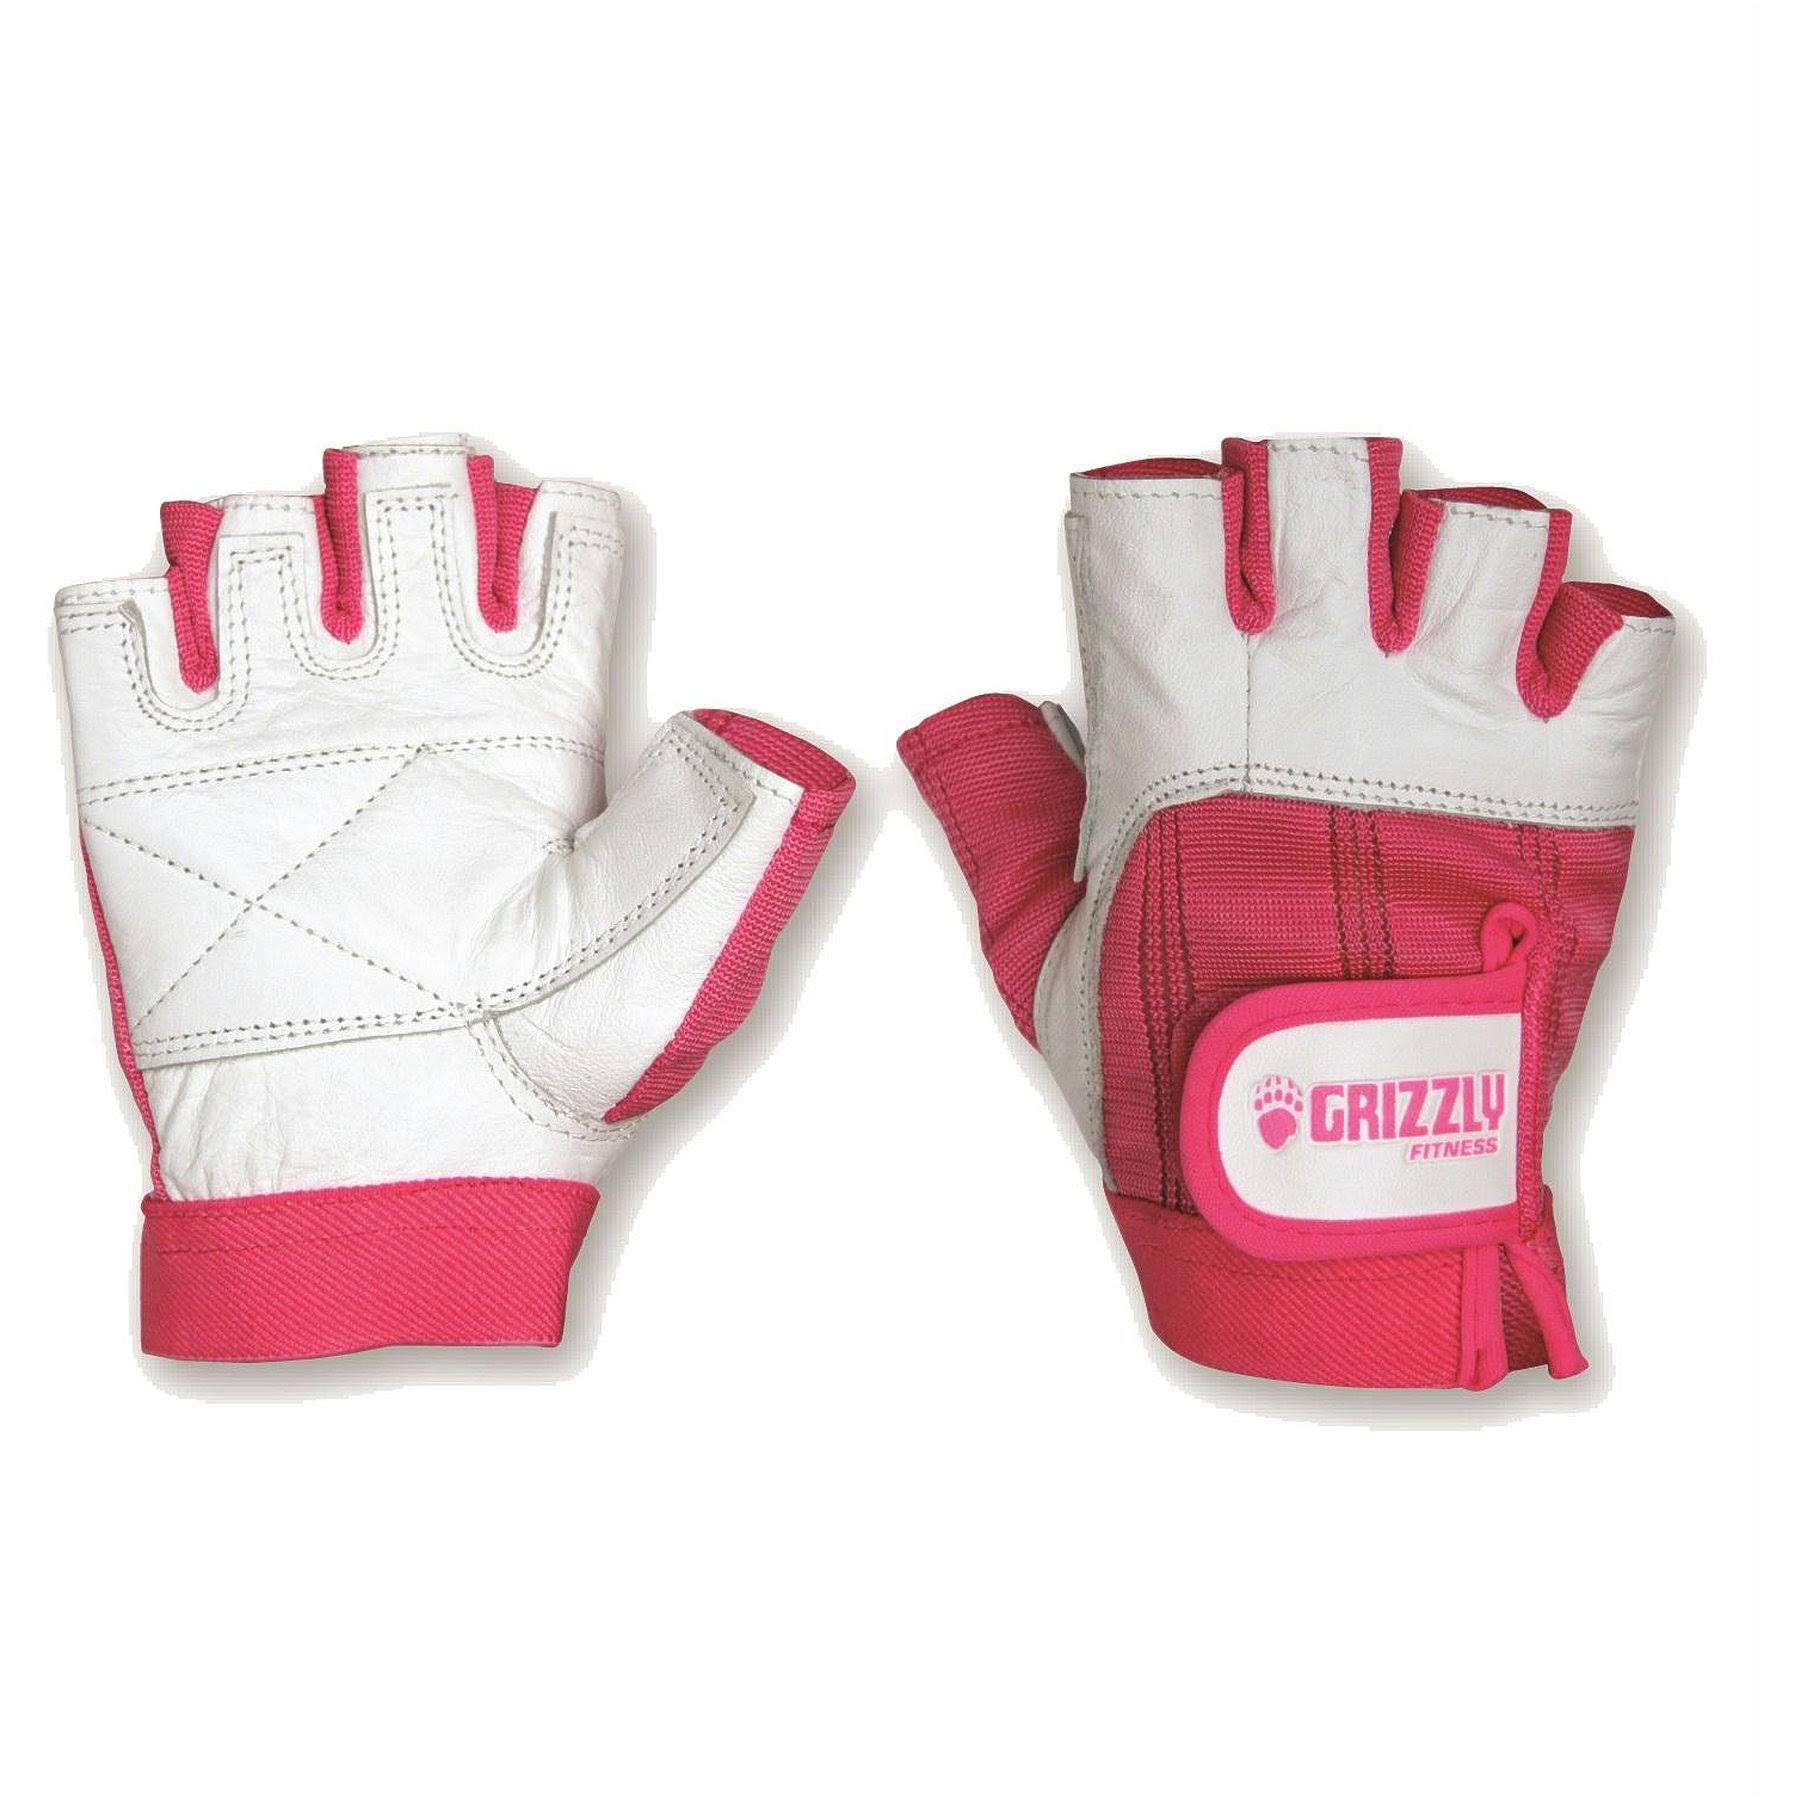 Grizzly Fitness 4007117 Women's Awareness Training Gloves - Pink Ribbon, Large, Half Finger